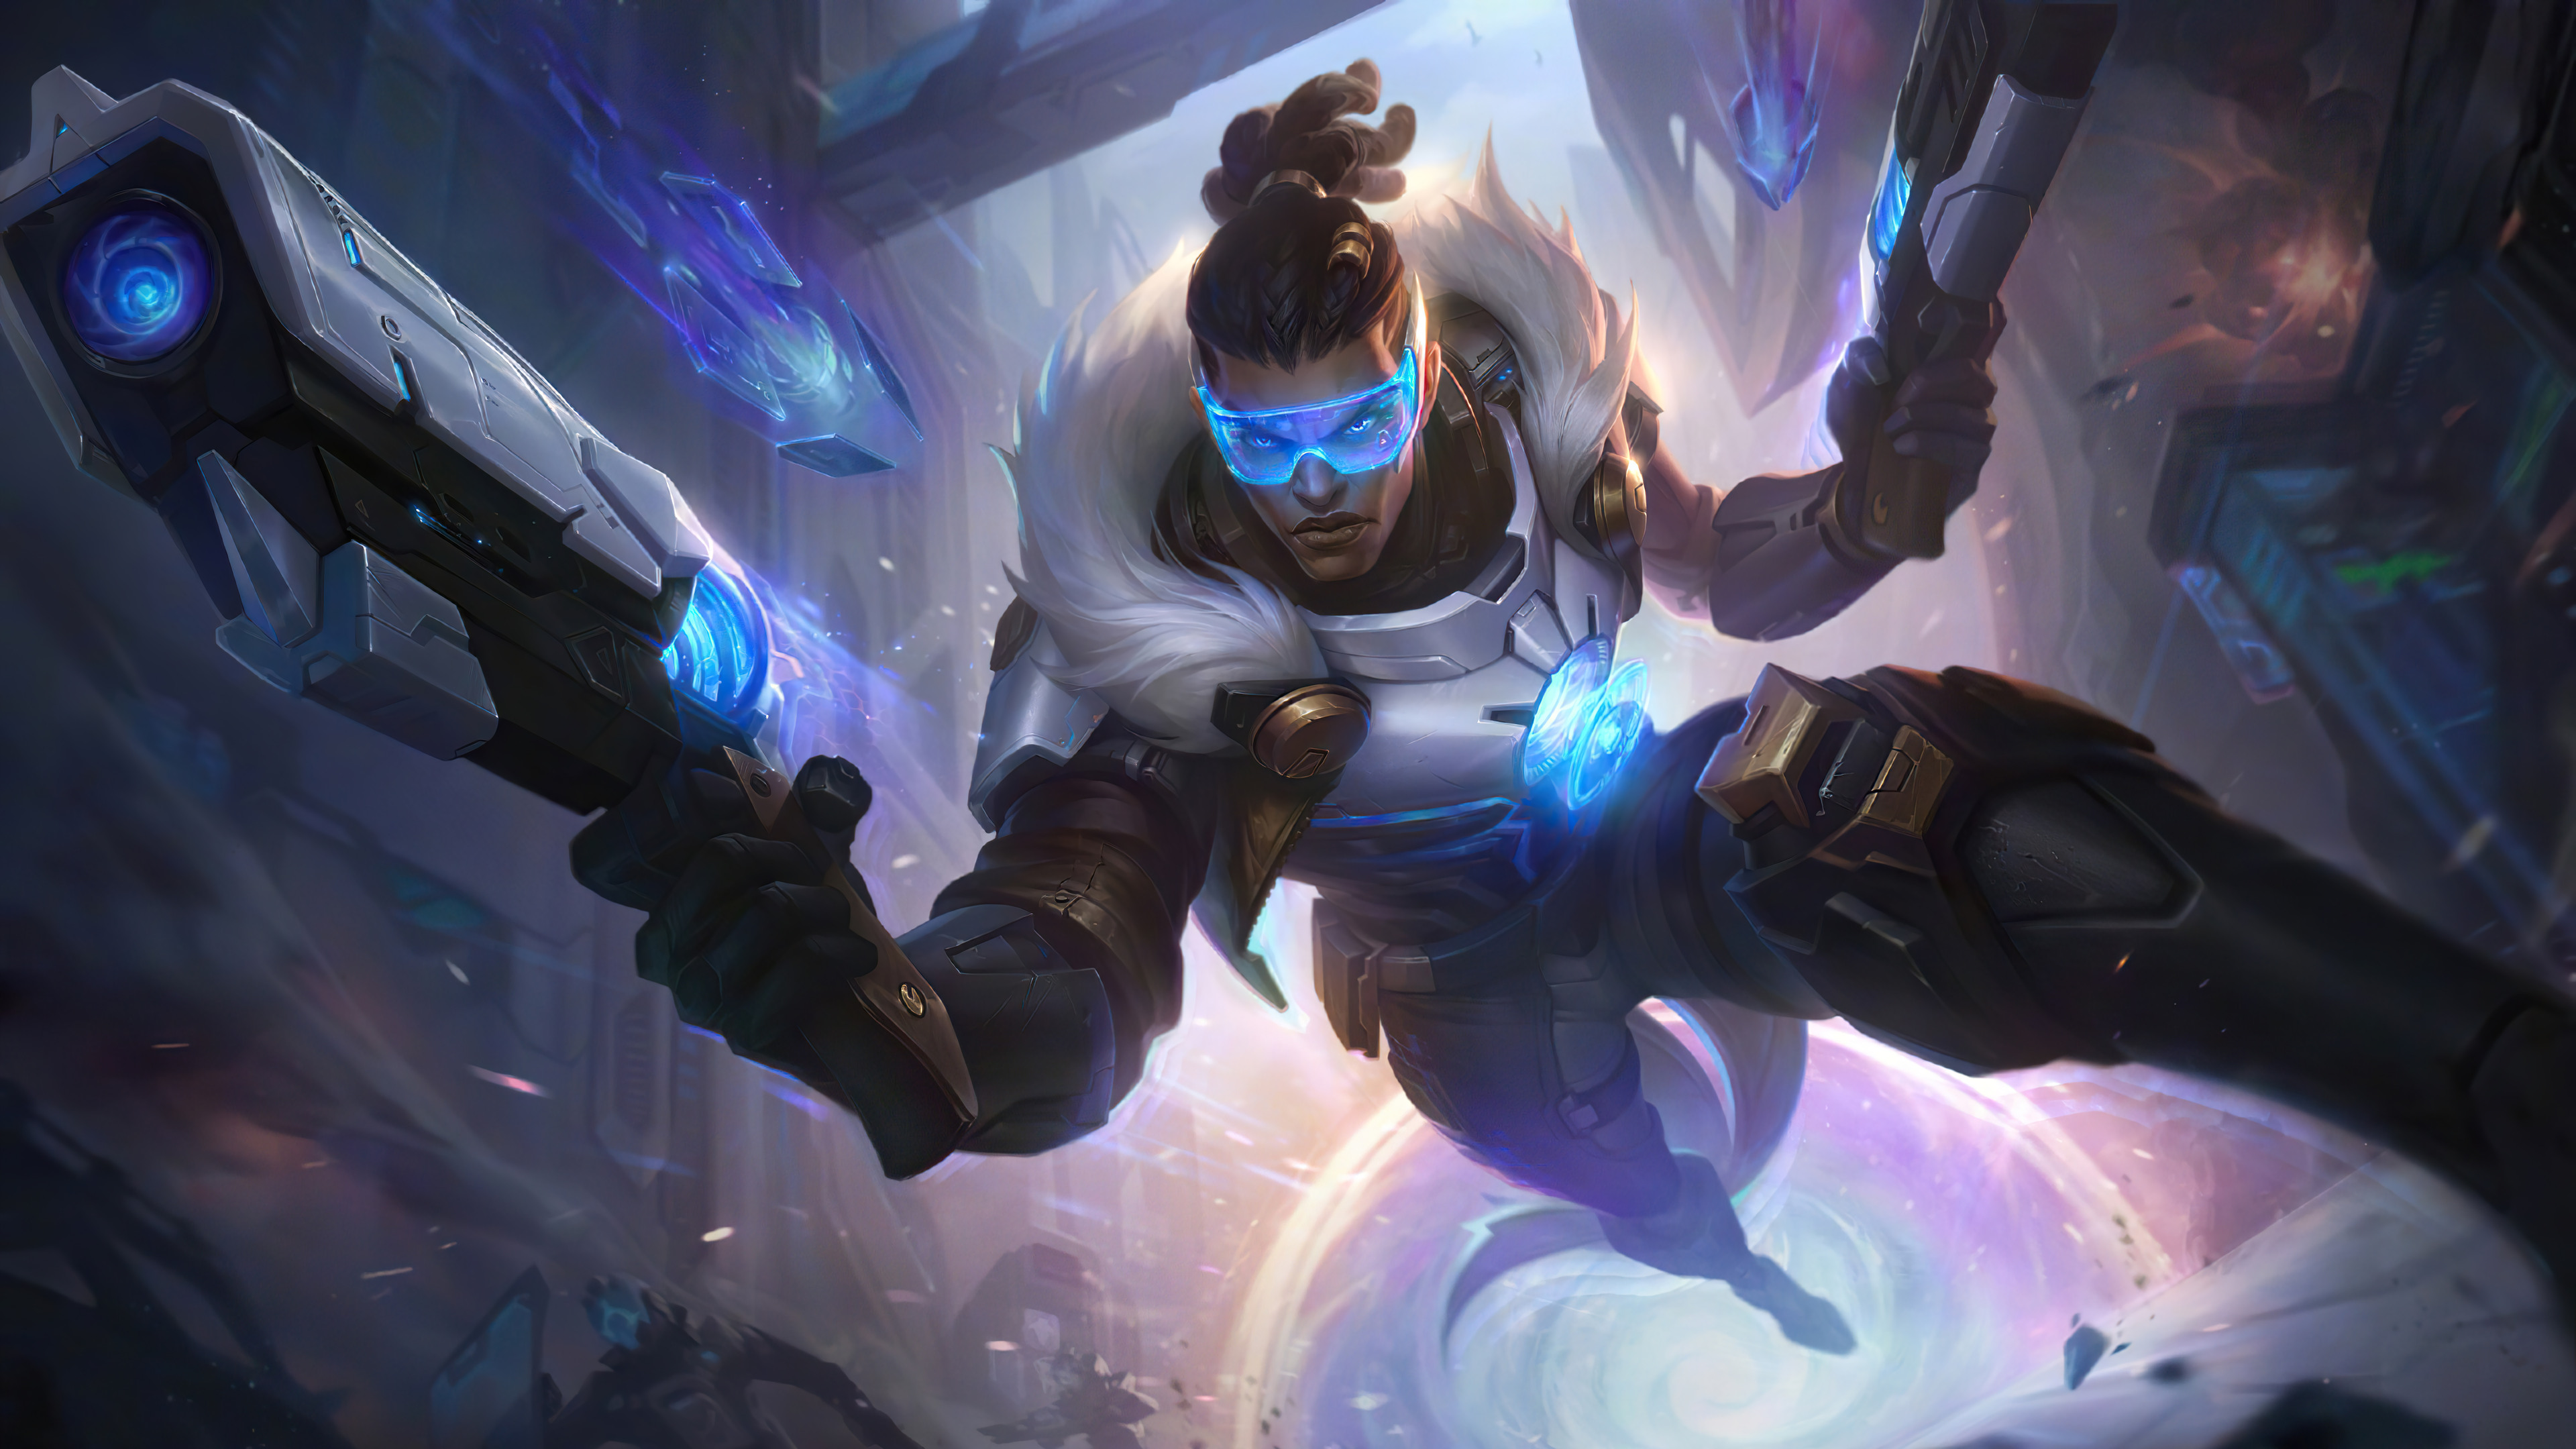 General 3840x2160 Lucian (League of Legends) ADC AD carry League of Legends Riot Games fire futuristic video game characters PC gaming weapon GZG Pulsefire (League of Legends) digital art